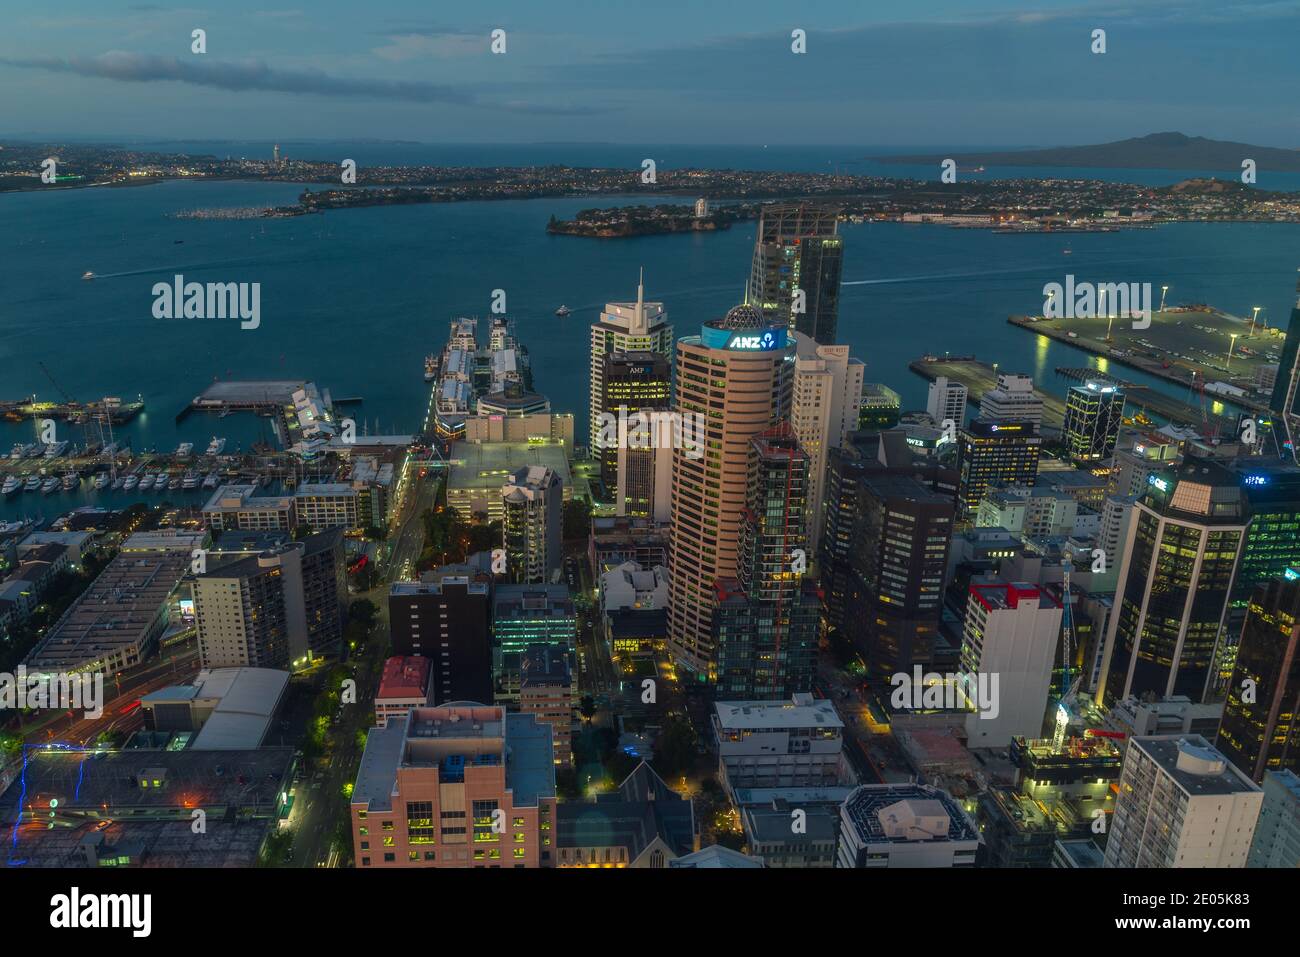 AUCKLAND, NEW ZEALAND, FEBRUARY 19, 2020: Night aerial view of waterfront of Auckland from Sky tower, New Zealand Stock Photo